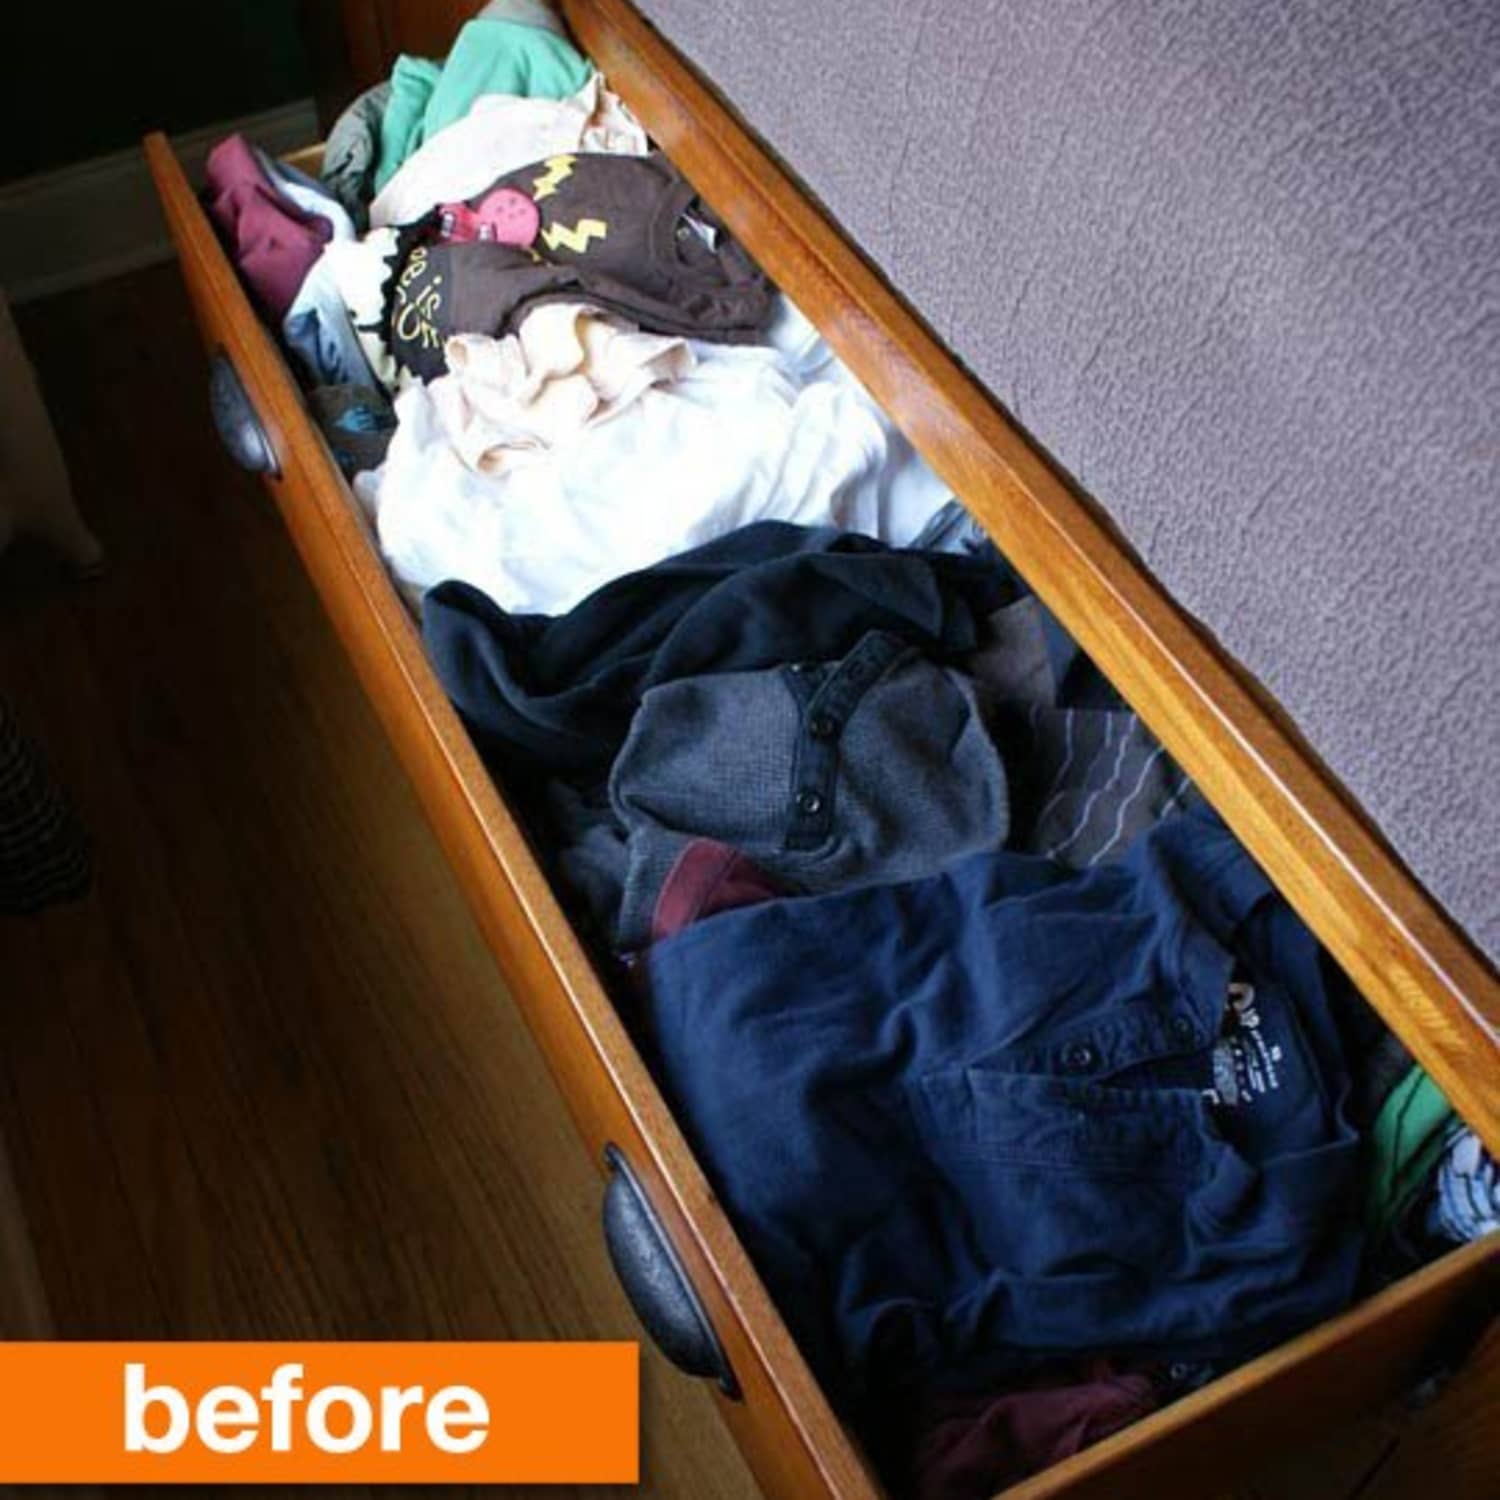 6 Key Tips to Help You Organize Dresser Drawers Efficiently